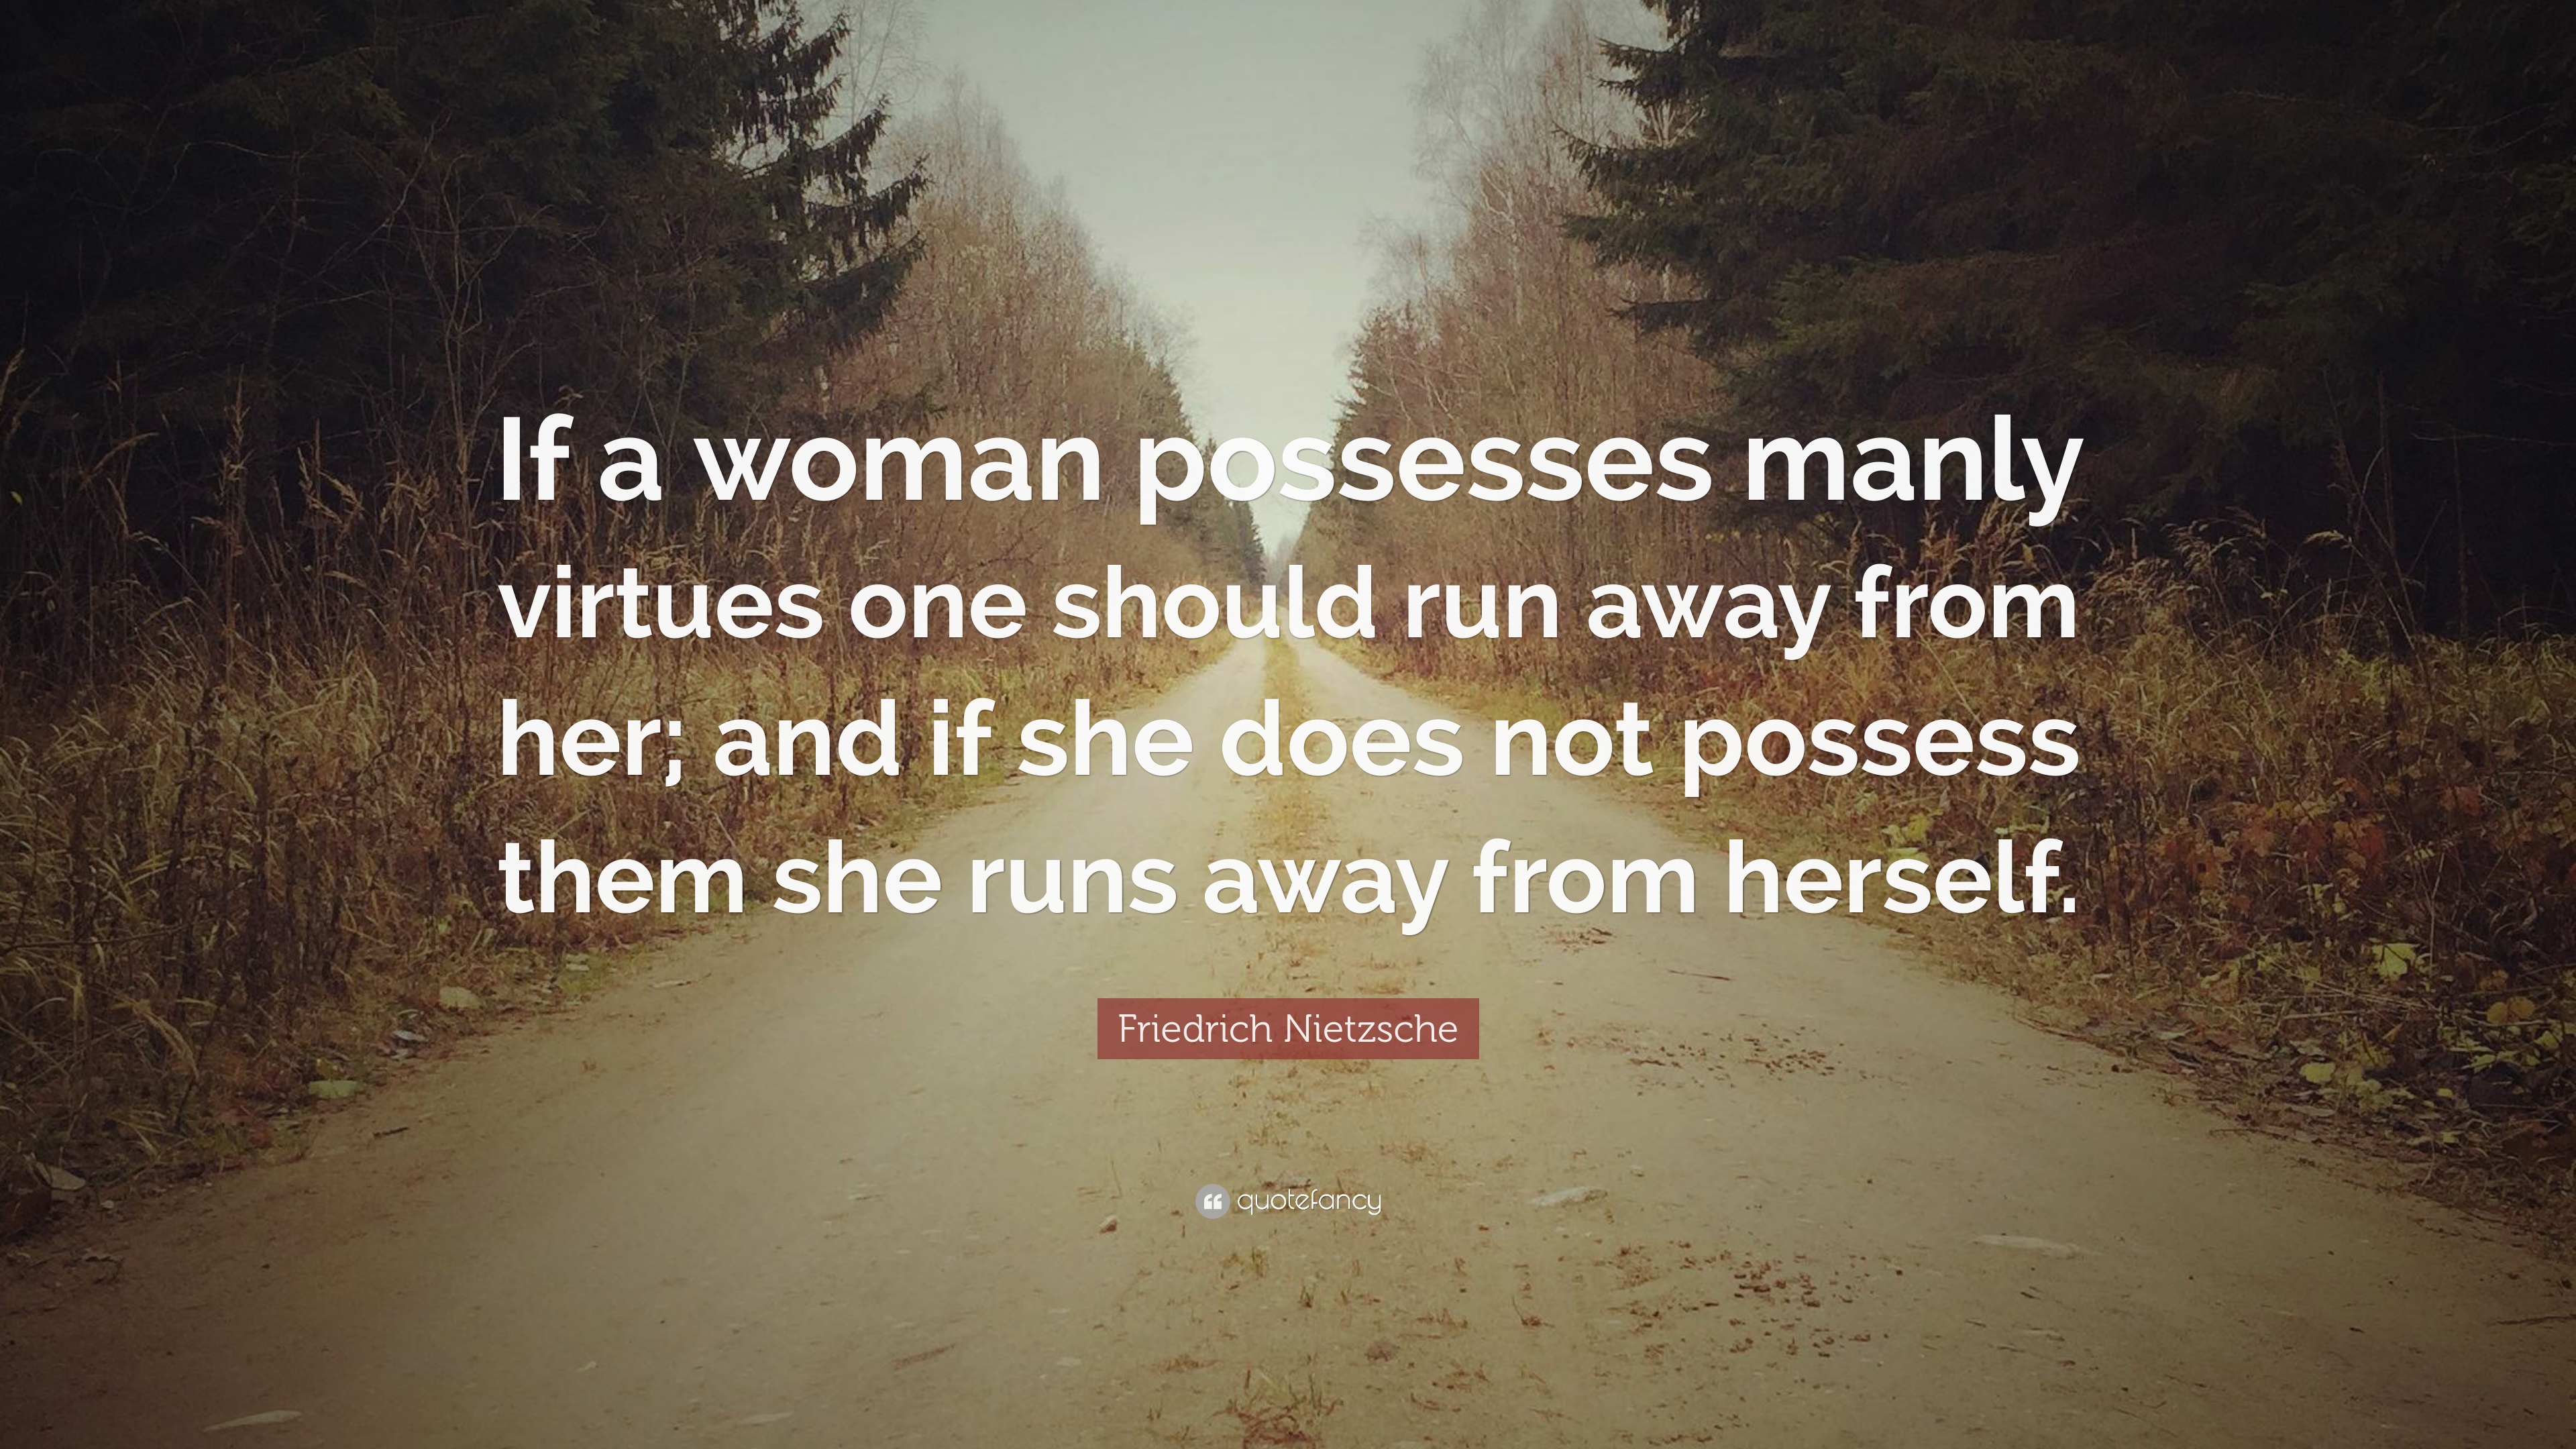 Friedrich Nietzsche Quote: “If a woman possesses manly virtues one